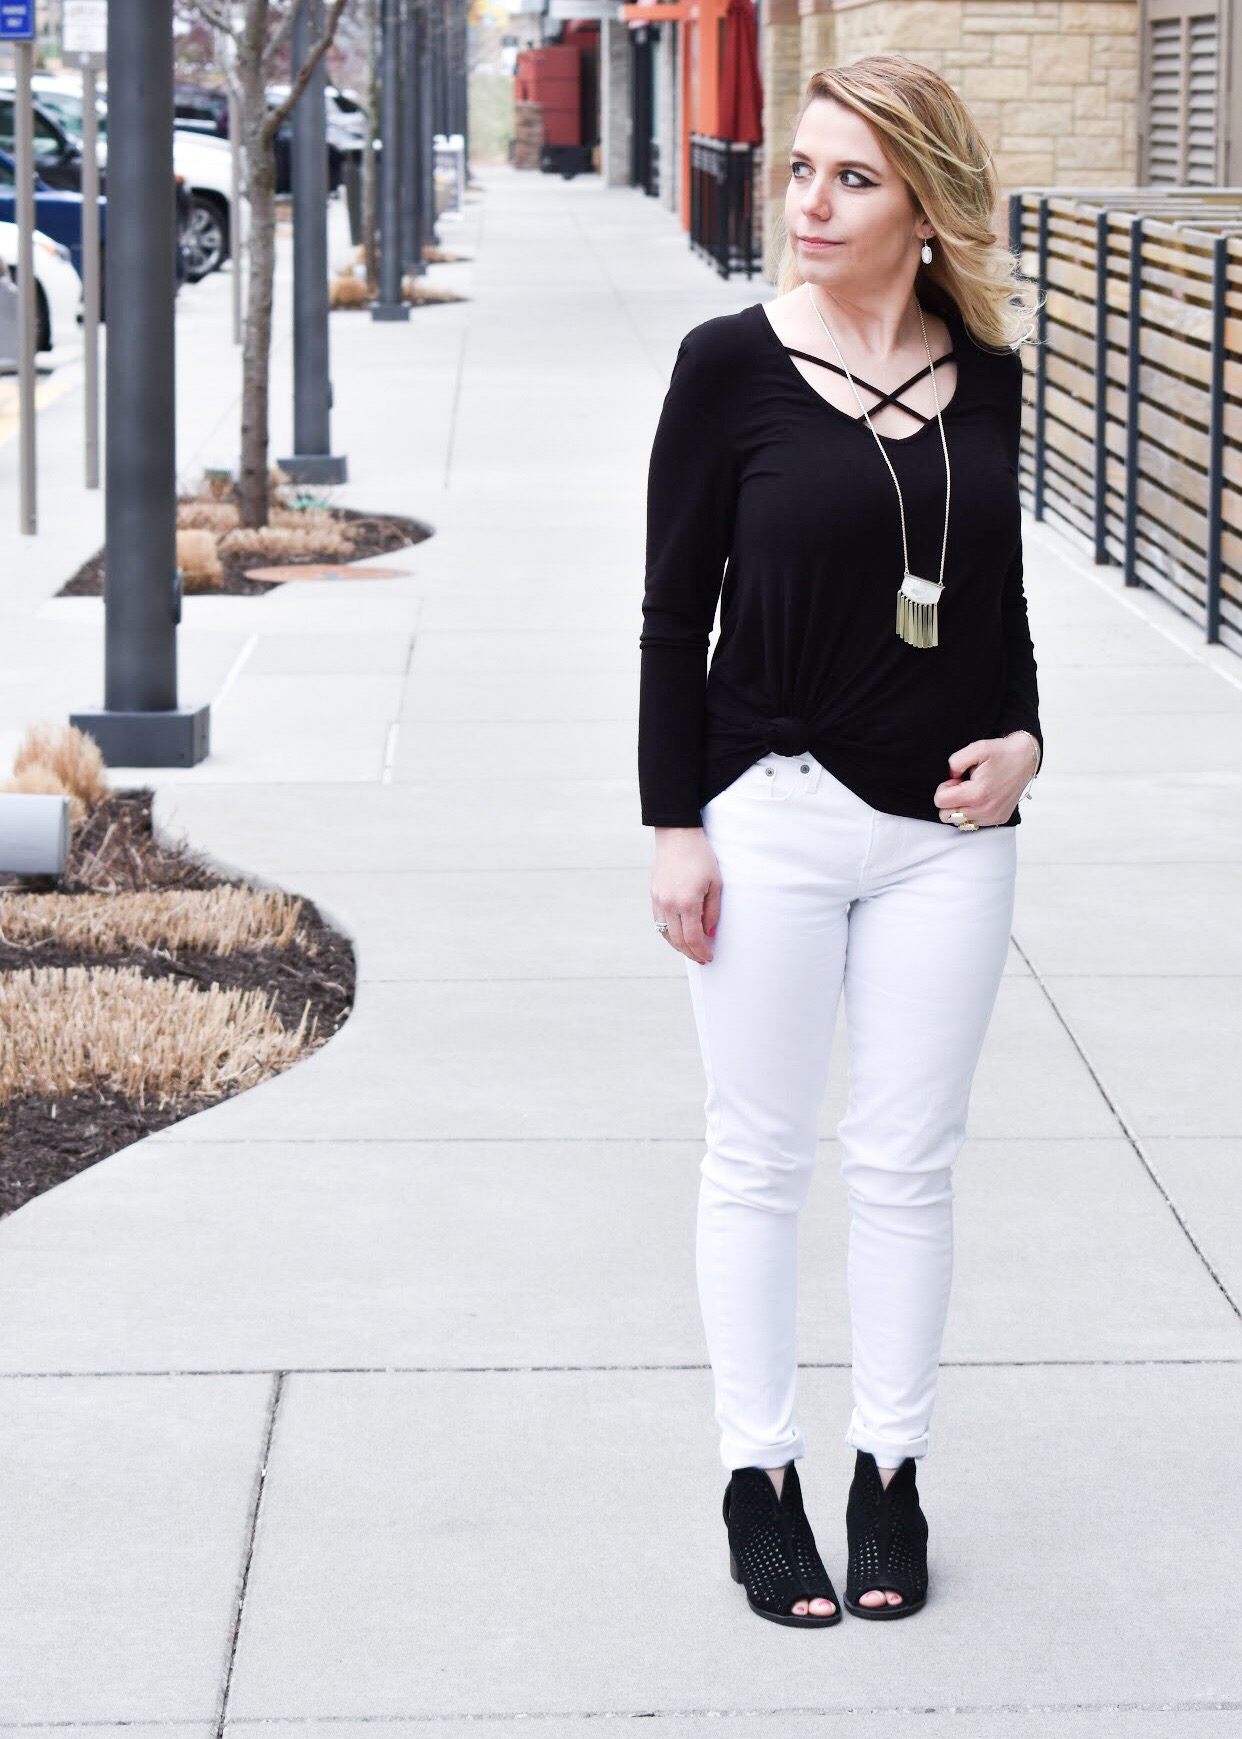 Monochrome Kendra Scott Jewelry Look: Kansas City fashion blogger COVET by tricia showcases a black and white spring transitional spring style featuring Kendra Scott jewelry. Here's how to style a knotted blouse with white pants, peep-toe heels, and gorgeous jewelry from Kendra Scott. The jewelry used in this post is available from Threshing Bee in Overland Park, KS.